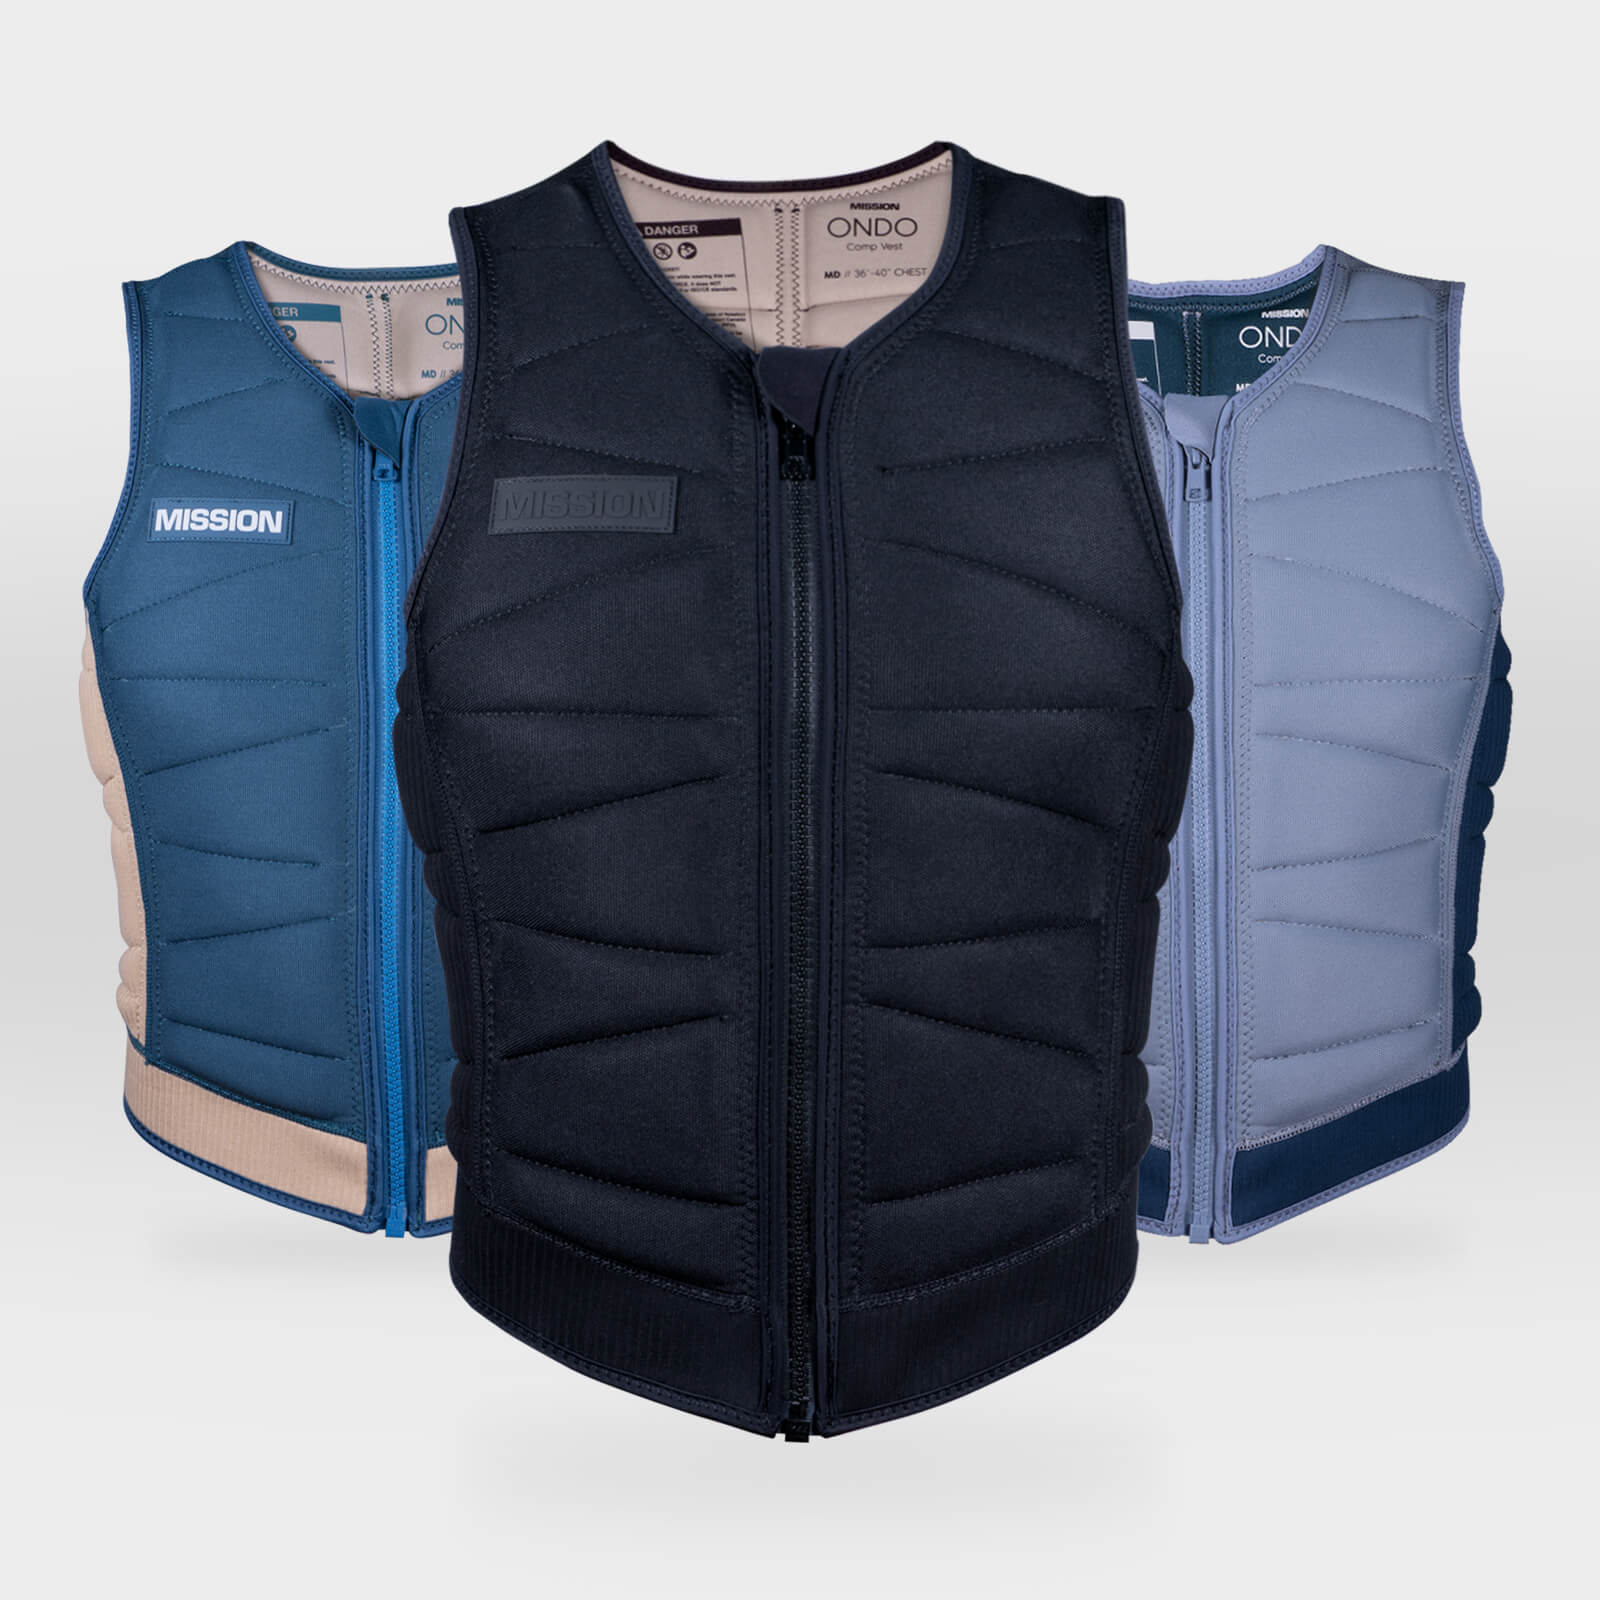 ONDO comp vest in a variety of colors